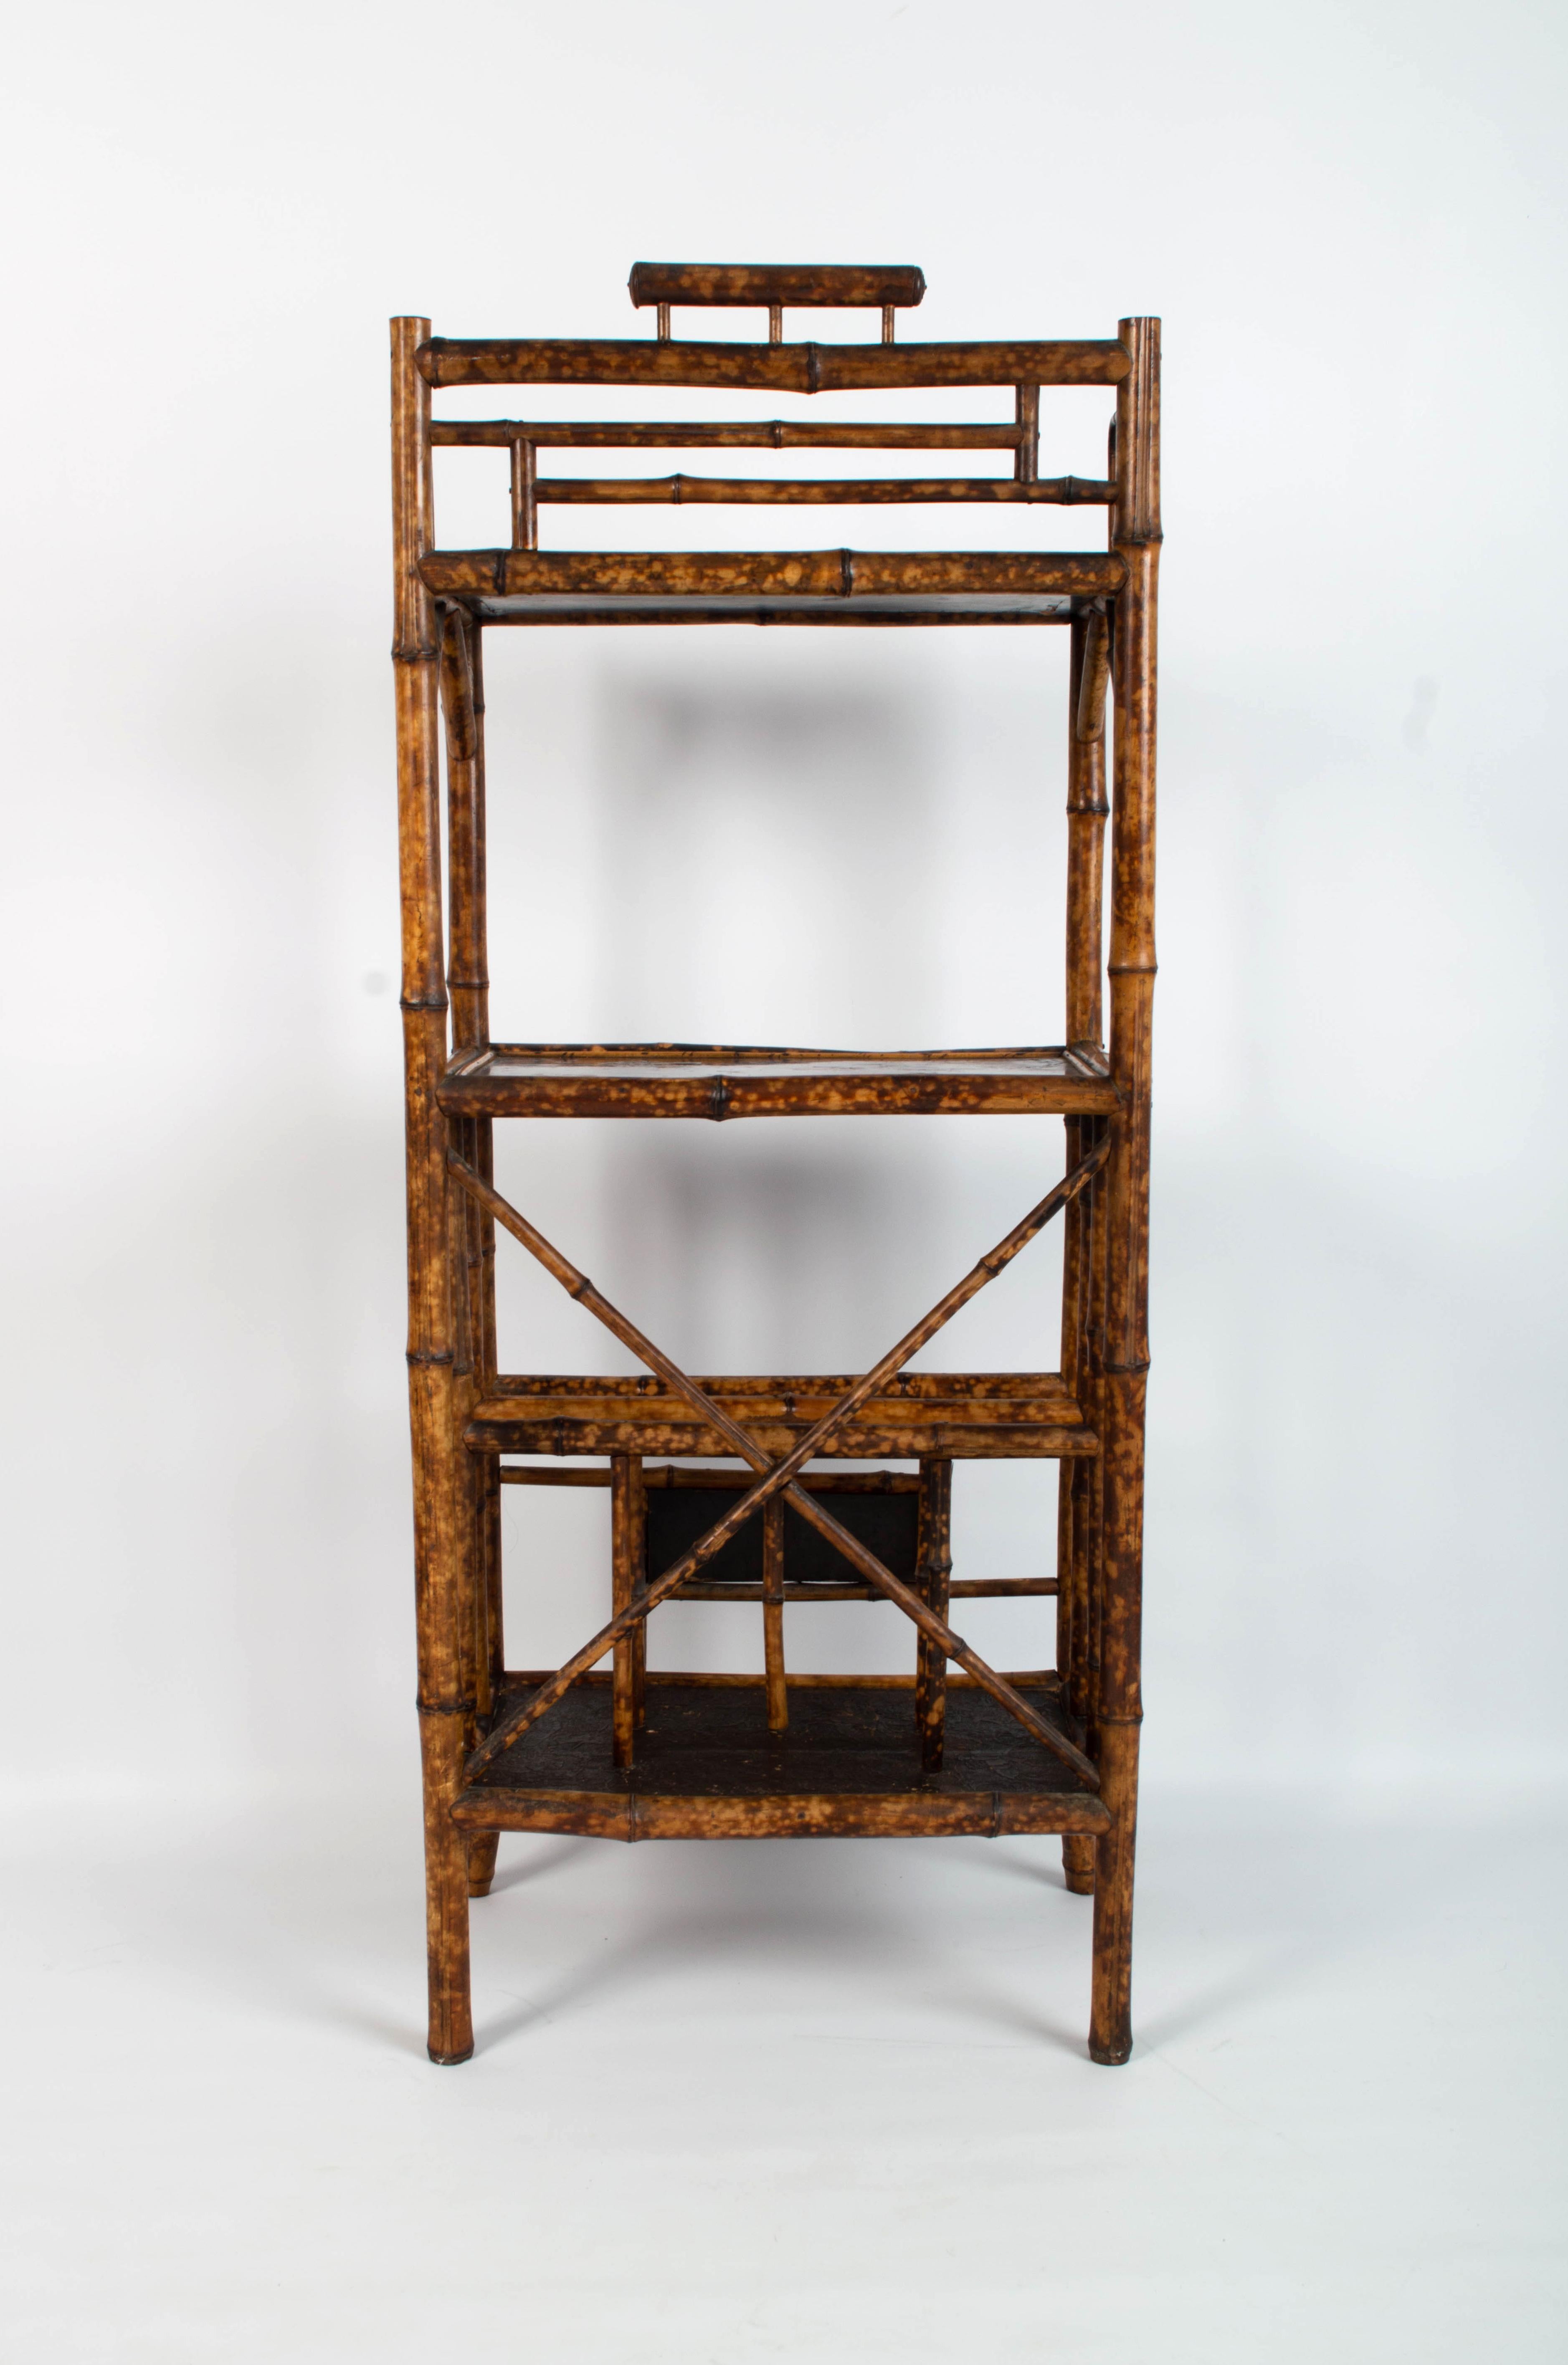 Antique 19th Century Anglo-Chinese Lacquered Bamboo Etagere Shelves, England For Sale 1